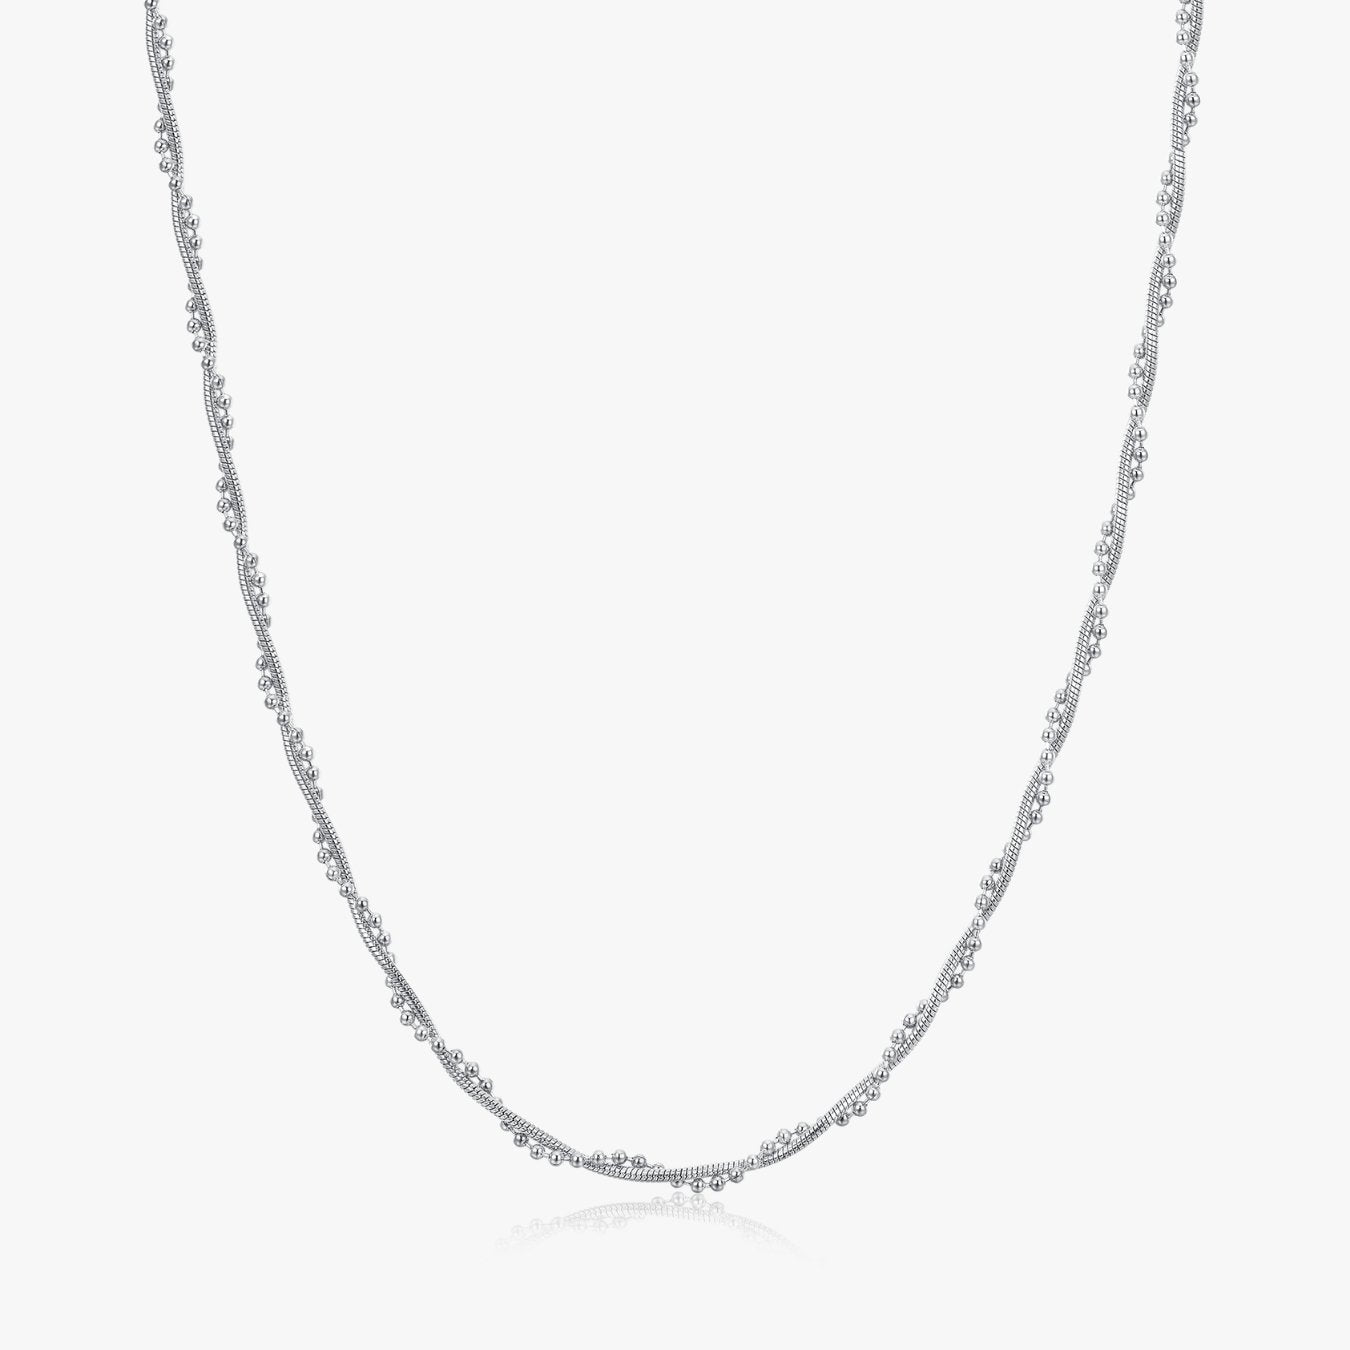 Bella Twisted Necklace - Flaire & Co.